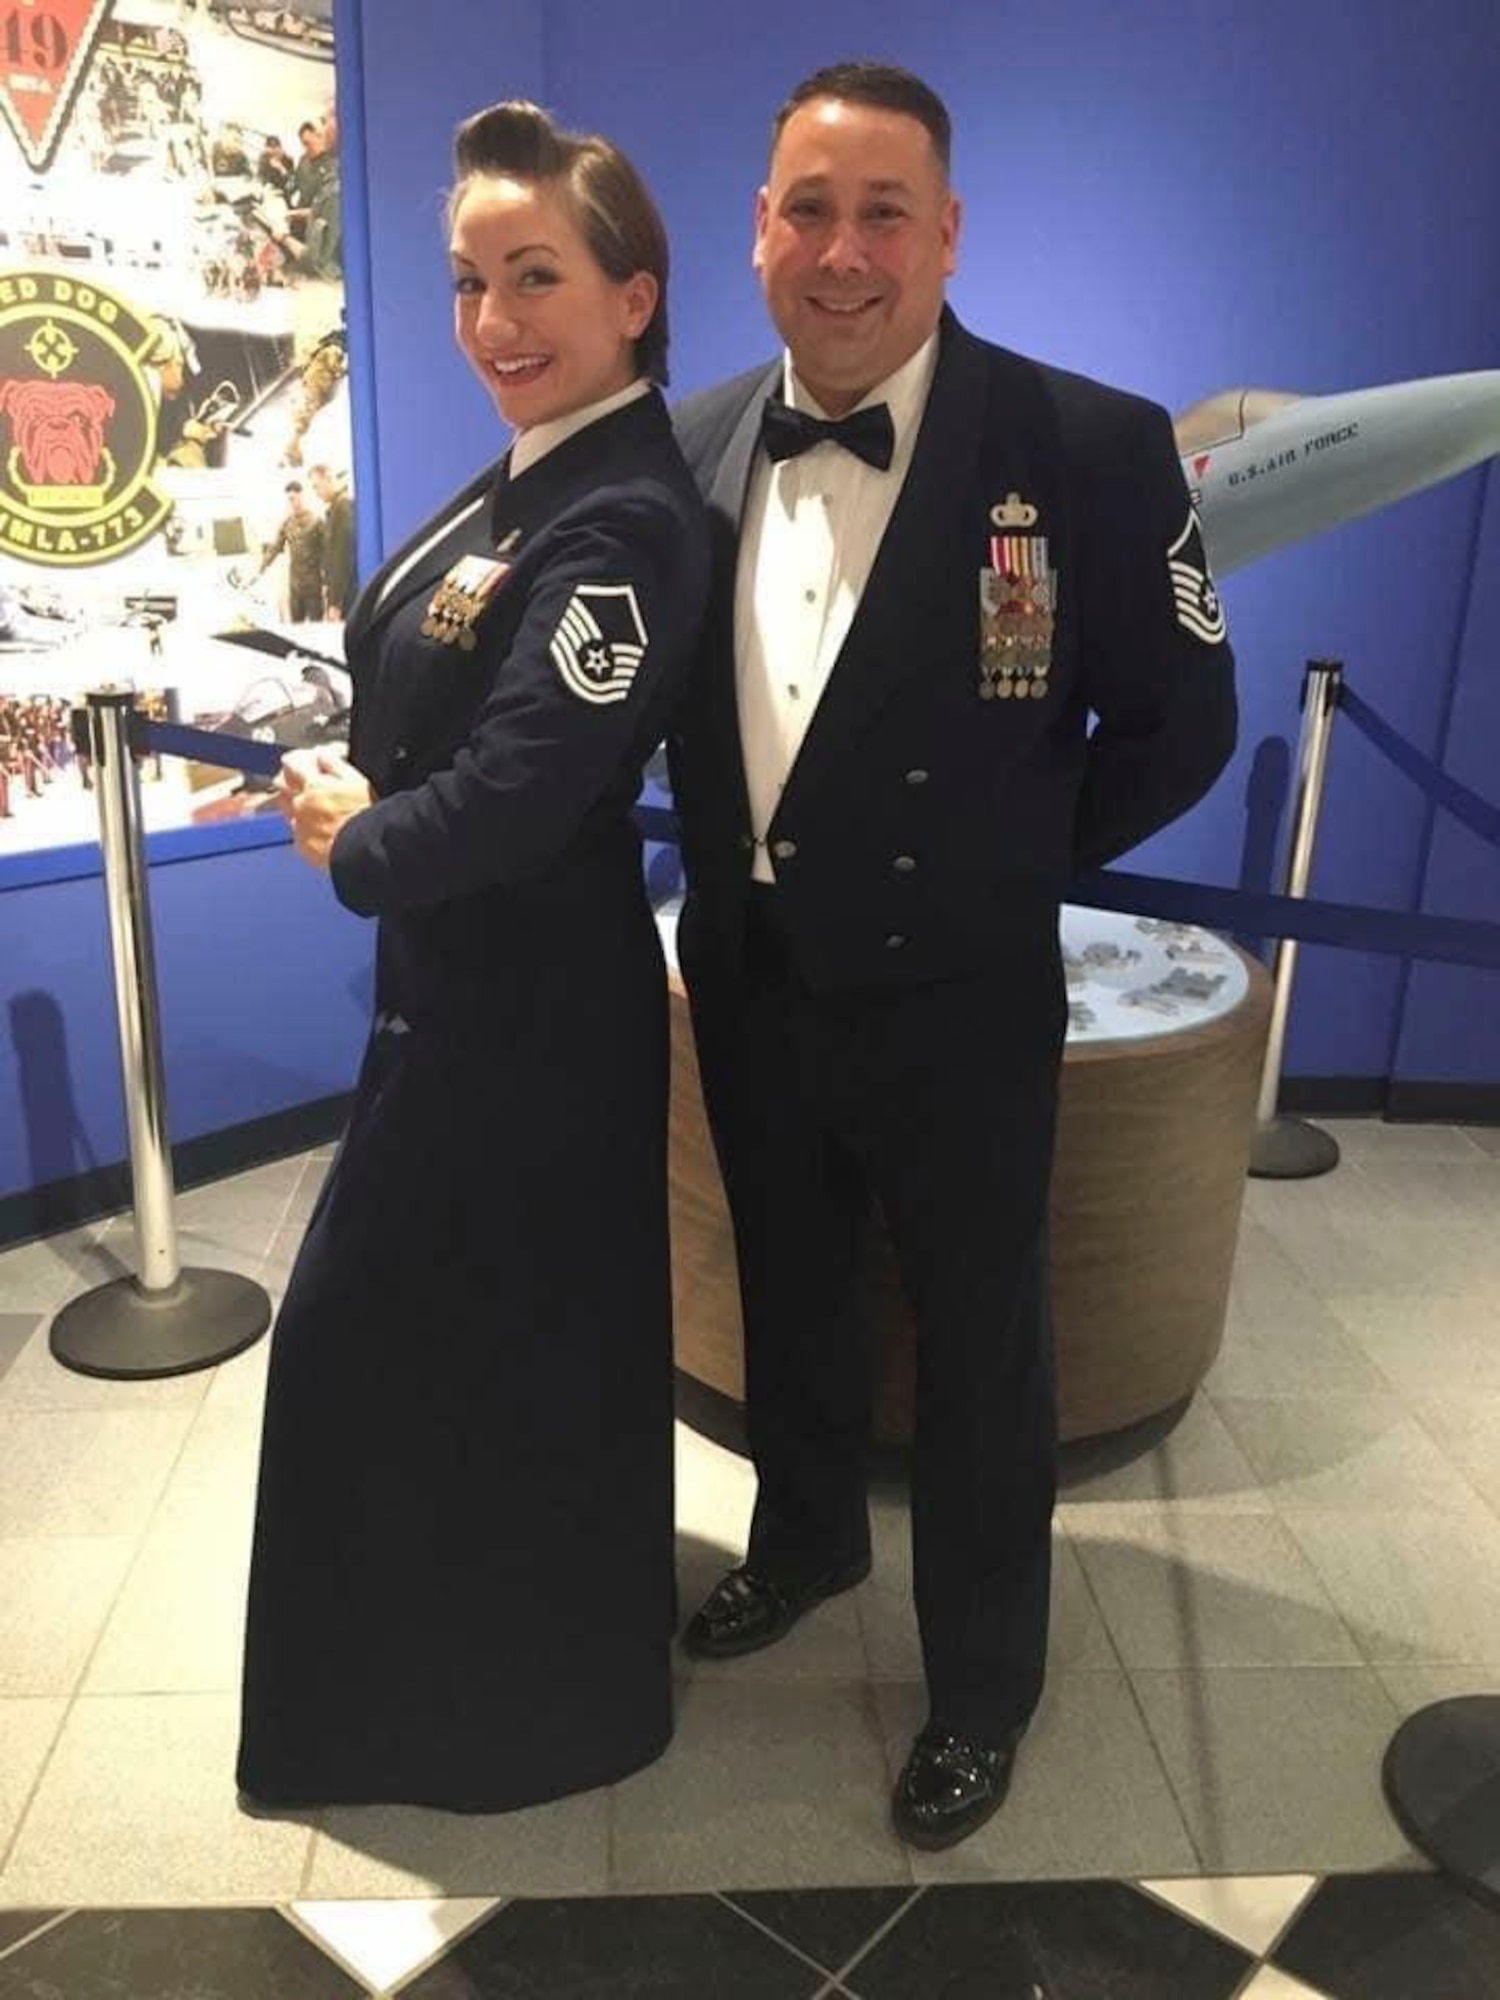 U.S. Air Force Master Sgt. Amanda “Mae” Arguello, 52nd Fighter Wing deputy chief, wing protocol, and Senior Master Sgt. Alvin “Al” F. Arguello II, Air Force Security Forces Center superintendent of strategic plans and programs, pose for a photo at a ceremony in 2017 at Robins Air Force Base, Georgia. Al and Mae have been coping with the COVID-19 pandemic by continuing to grow in their marriage despite the temporary distance the virus caused. (Photo courtesy of Master Sgt. Amanda “Mae” Arguello)